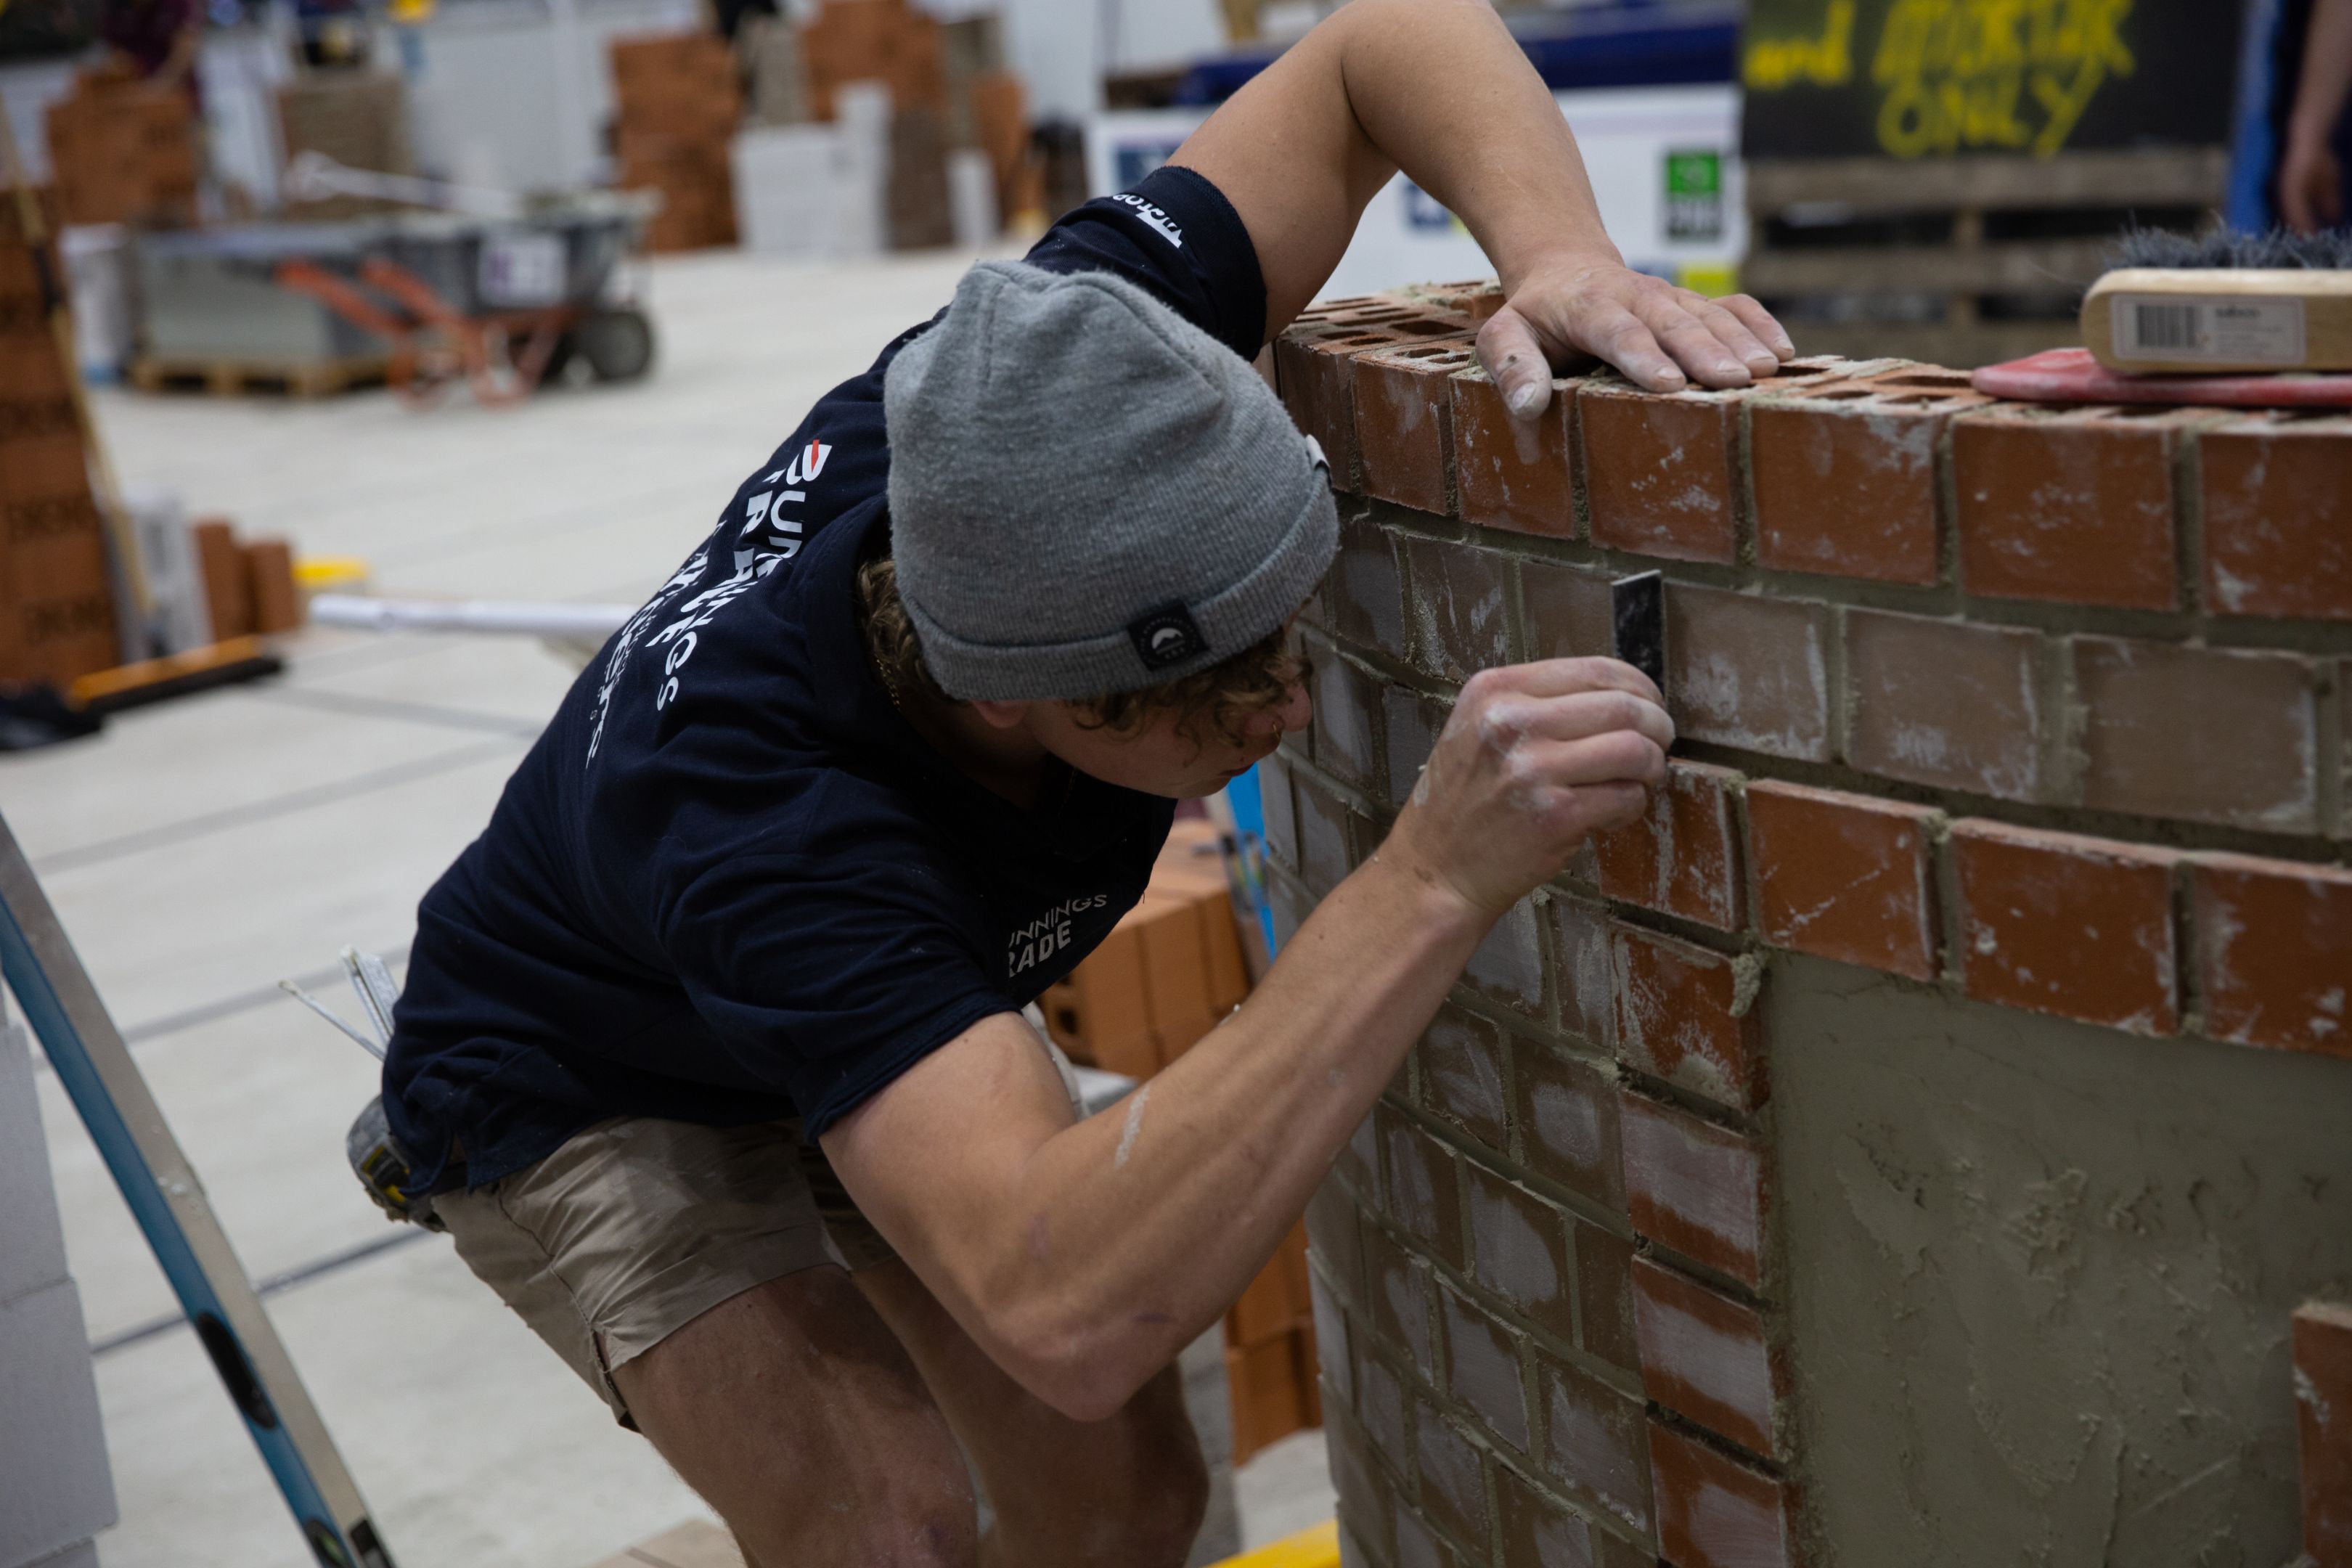 Blayde doing bricklaying during the WorldSkills competition